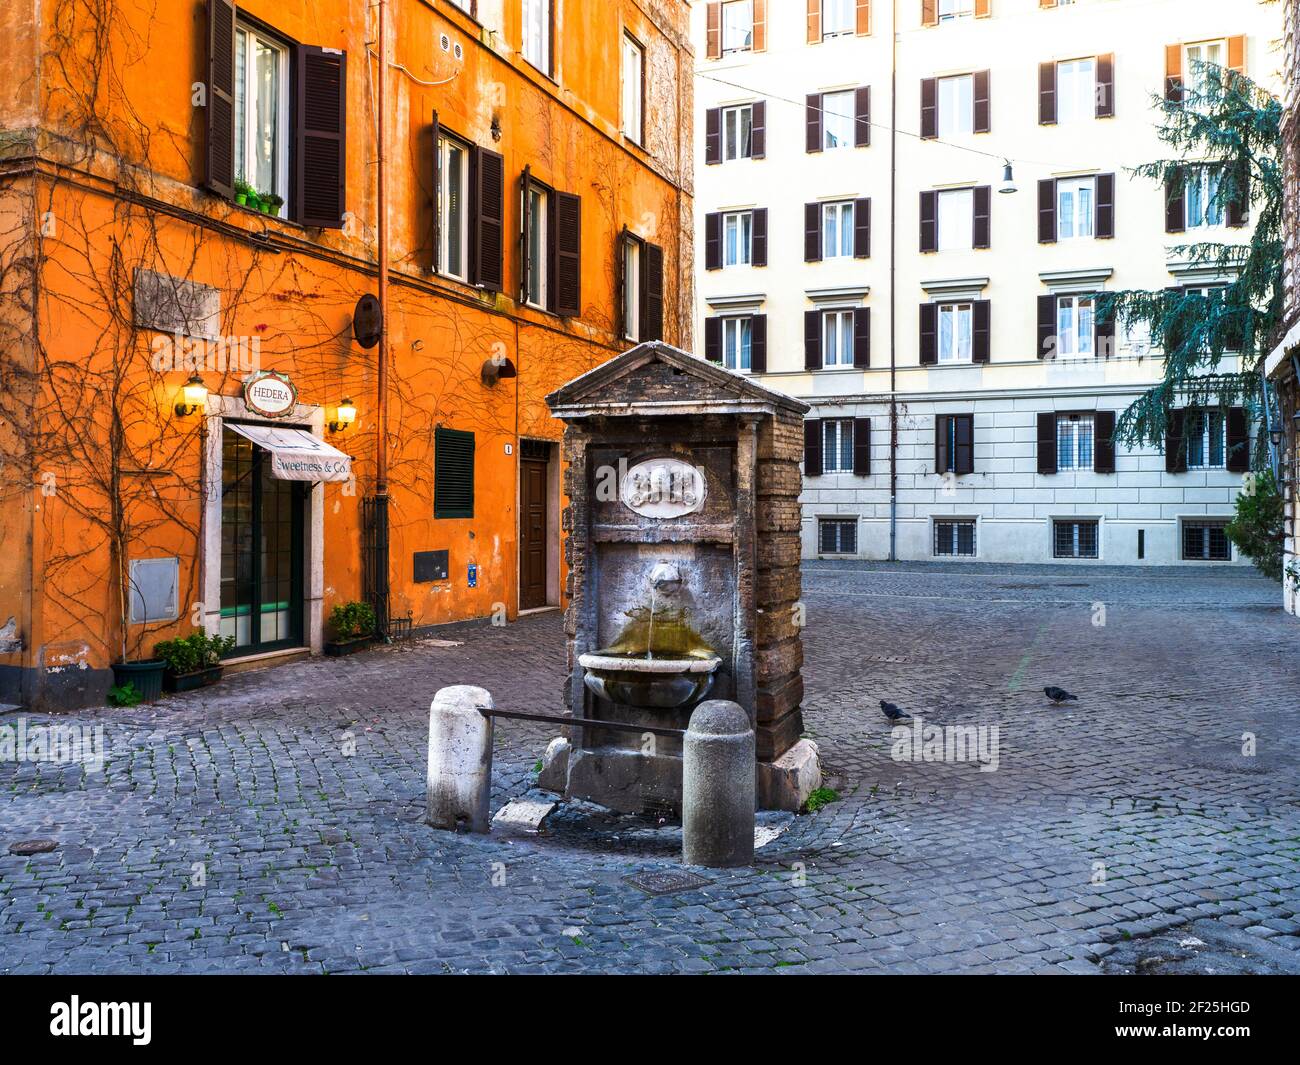 The fountain  in rione Borgo is protected by two small columns connected by an iron bar, consists of a simple rectangular travertine aedicule, gable at the top and leaning against a brick construction. The upper arch has a papal coat of arms - Rome, Italy Stock Photo